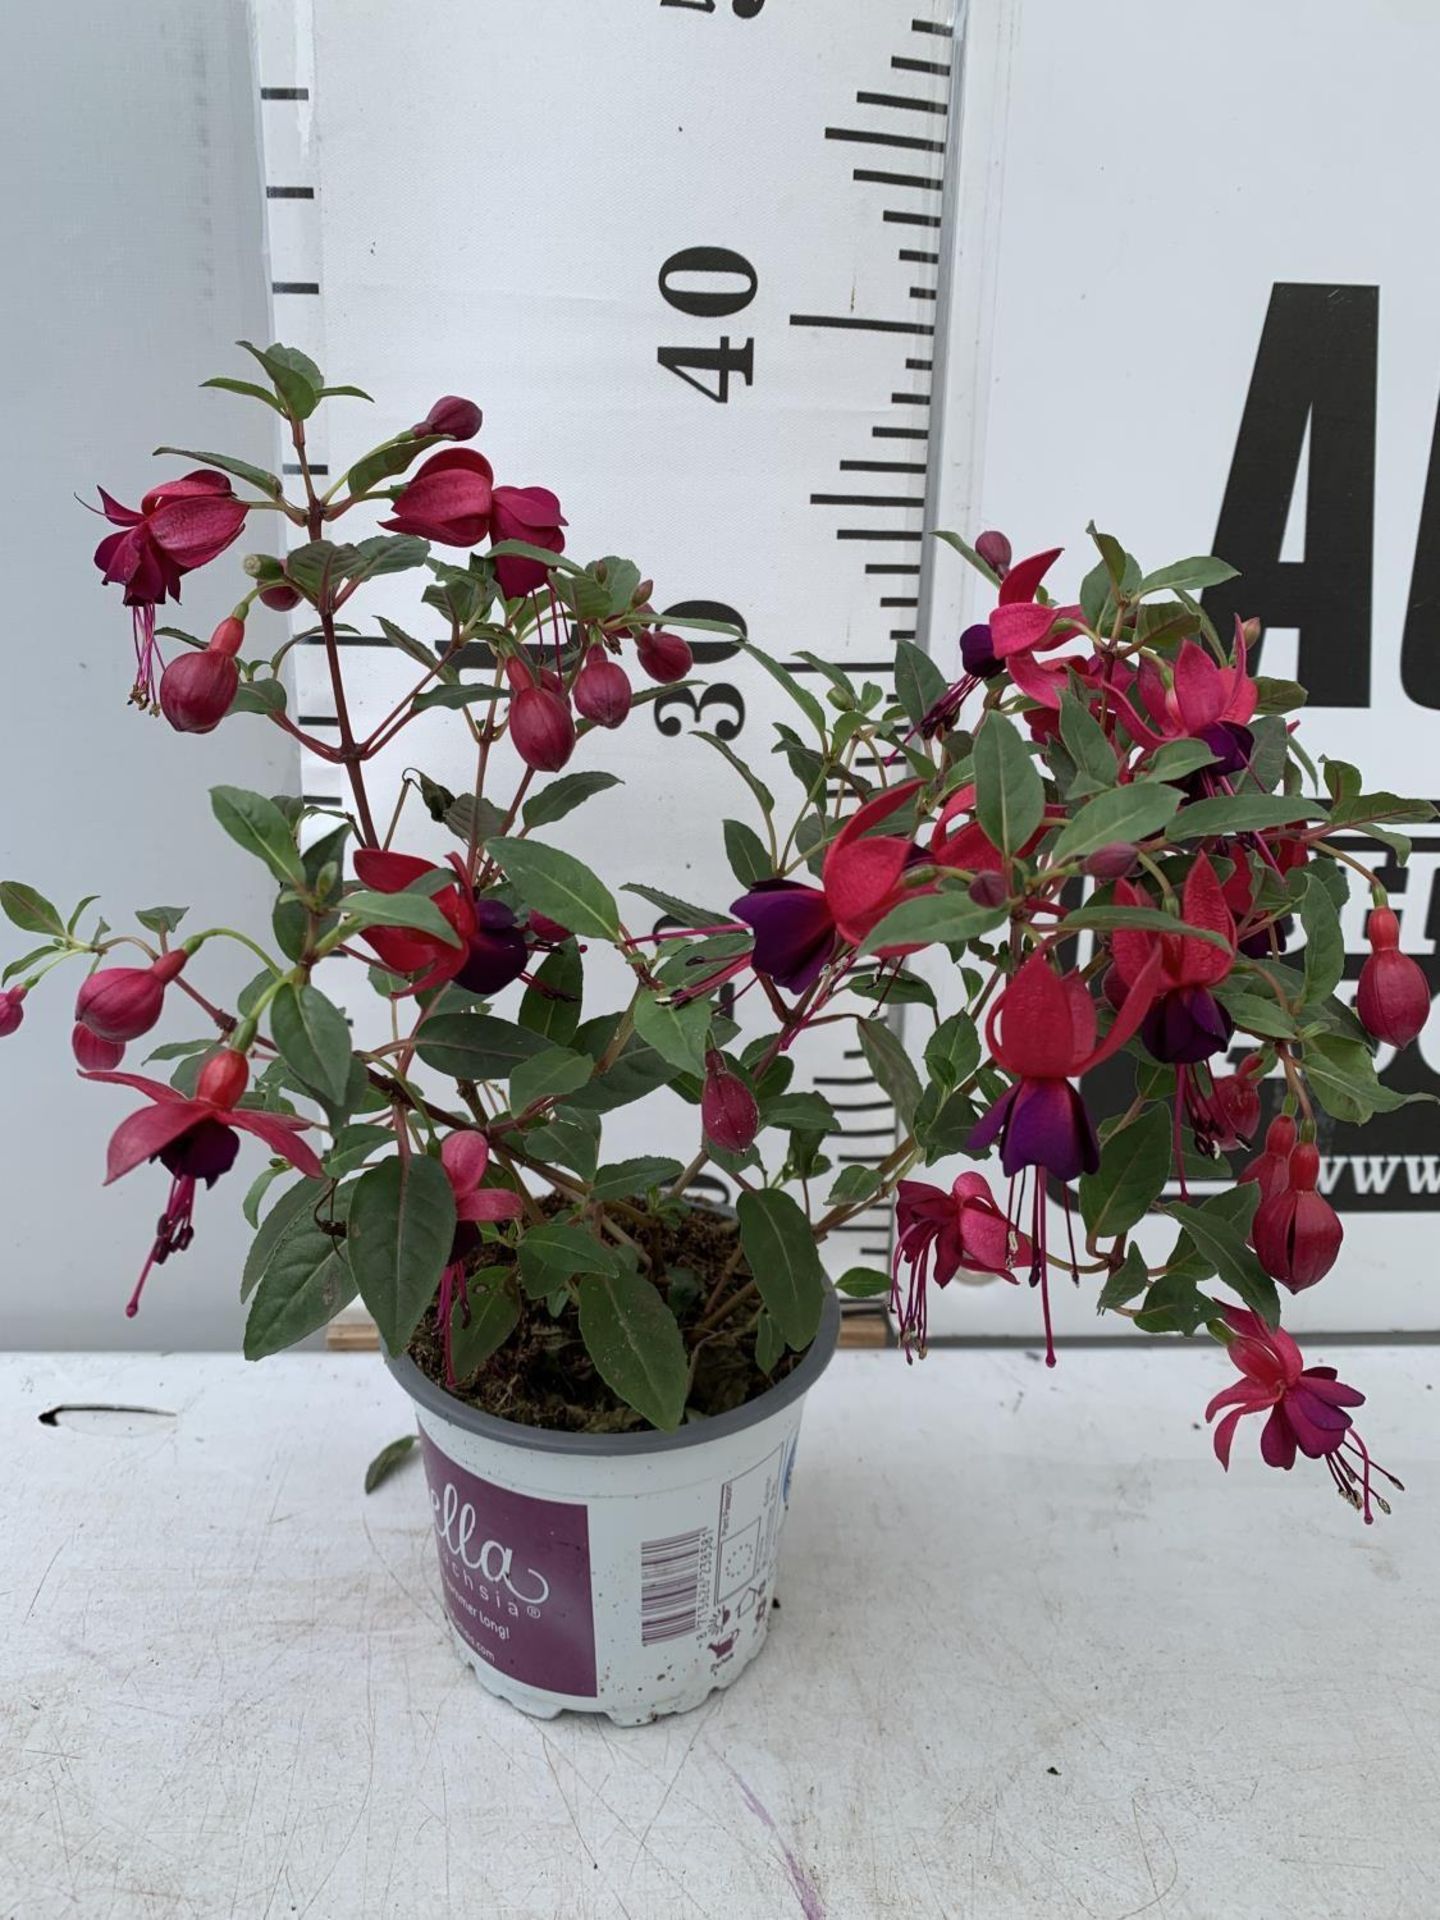 NINE FUCHSIA BELLA IN 20CM POTS 20-30CM TALL TO BE SOLD FOR THE NINE PLUS VAT - Image 8 of 8